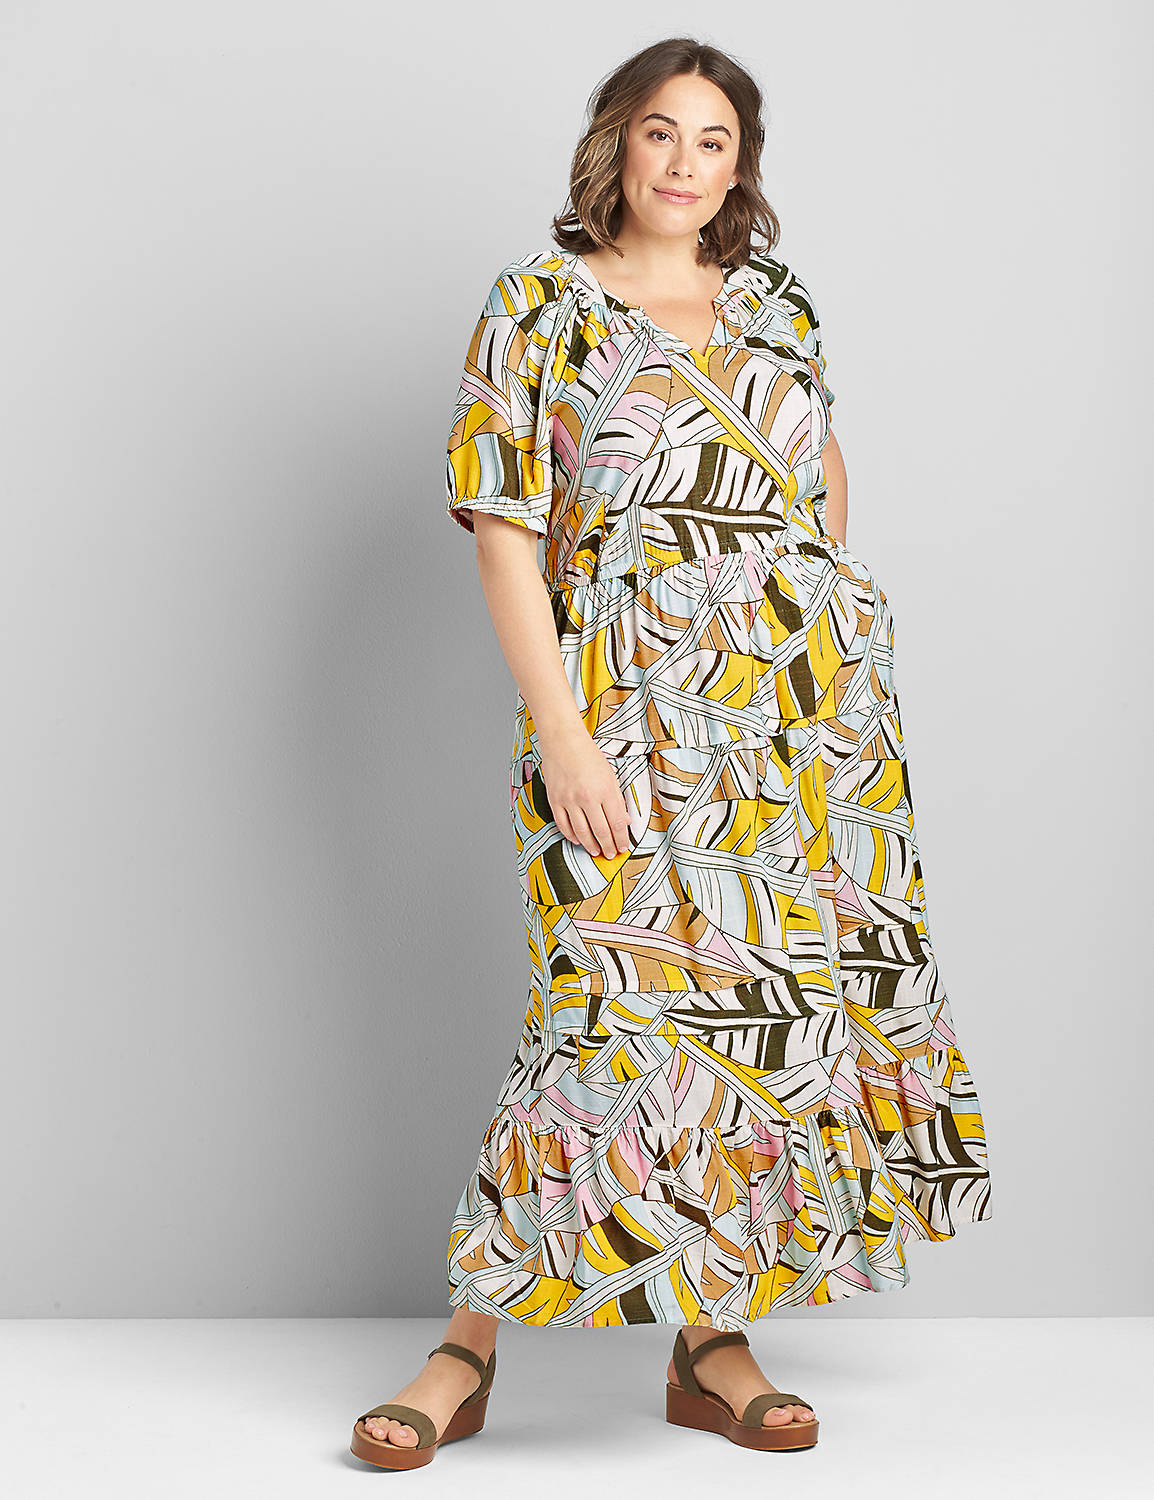 Elbow Sleeve Notch Neck Tuck Detail Maxi Dress1120931:LBSU21105_OutlinePalm_C6:18 Product Image 1